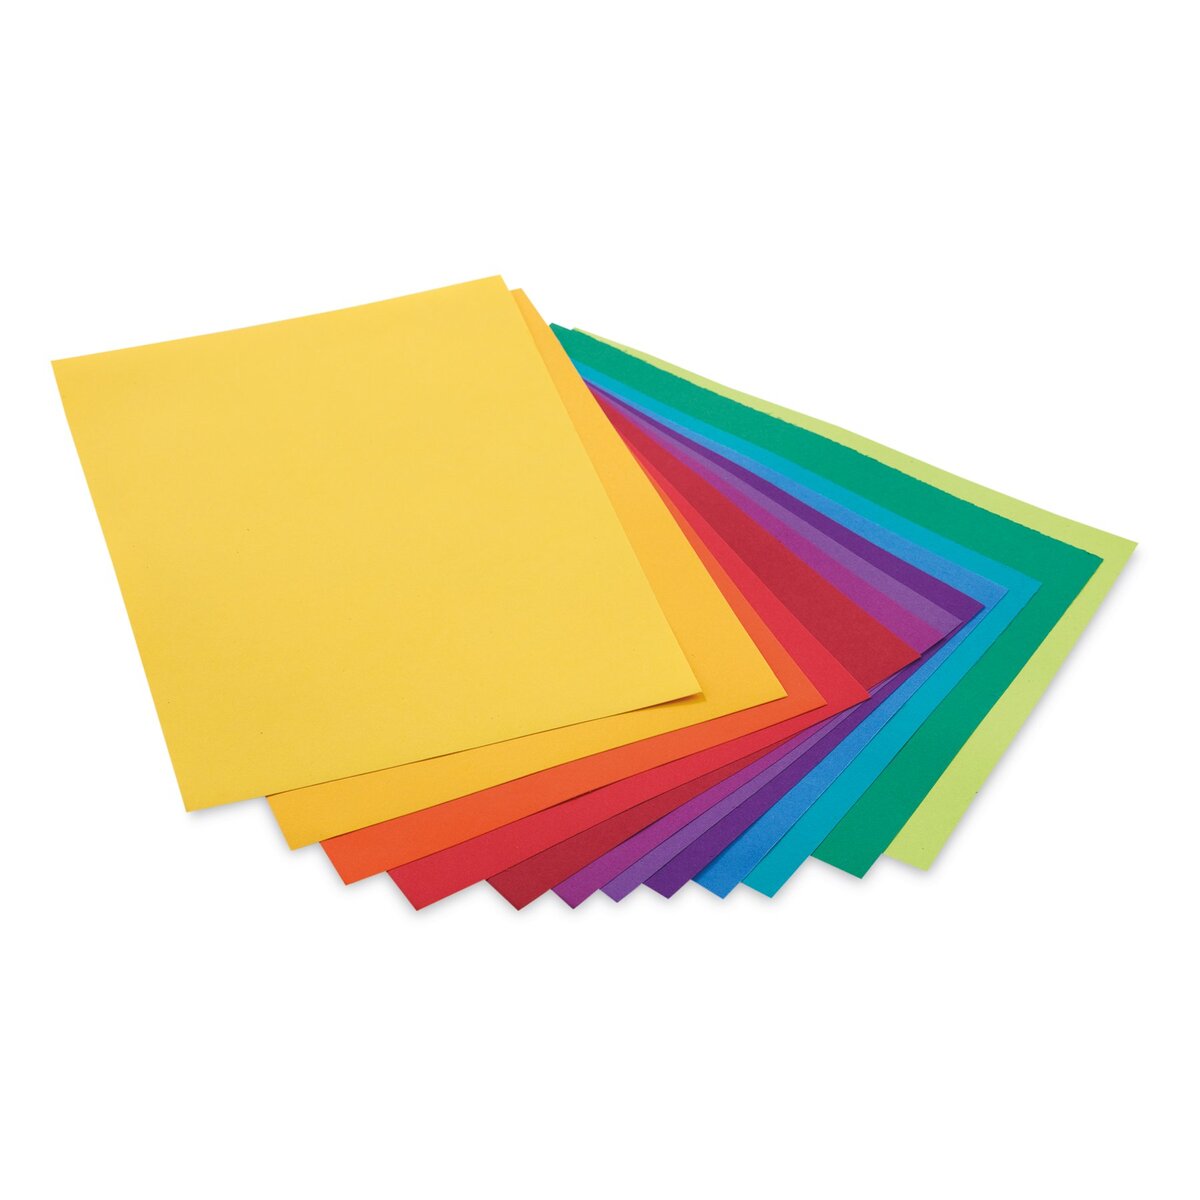 Pacon Tru-Ray Smart Stack Construction Paper Assorted Colors 12Inx18In 120 Sheets